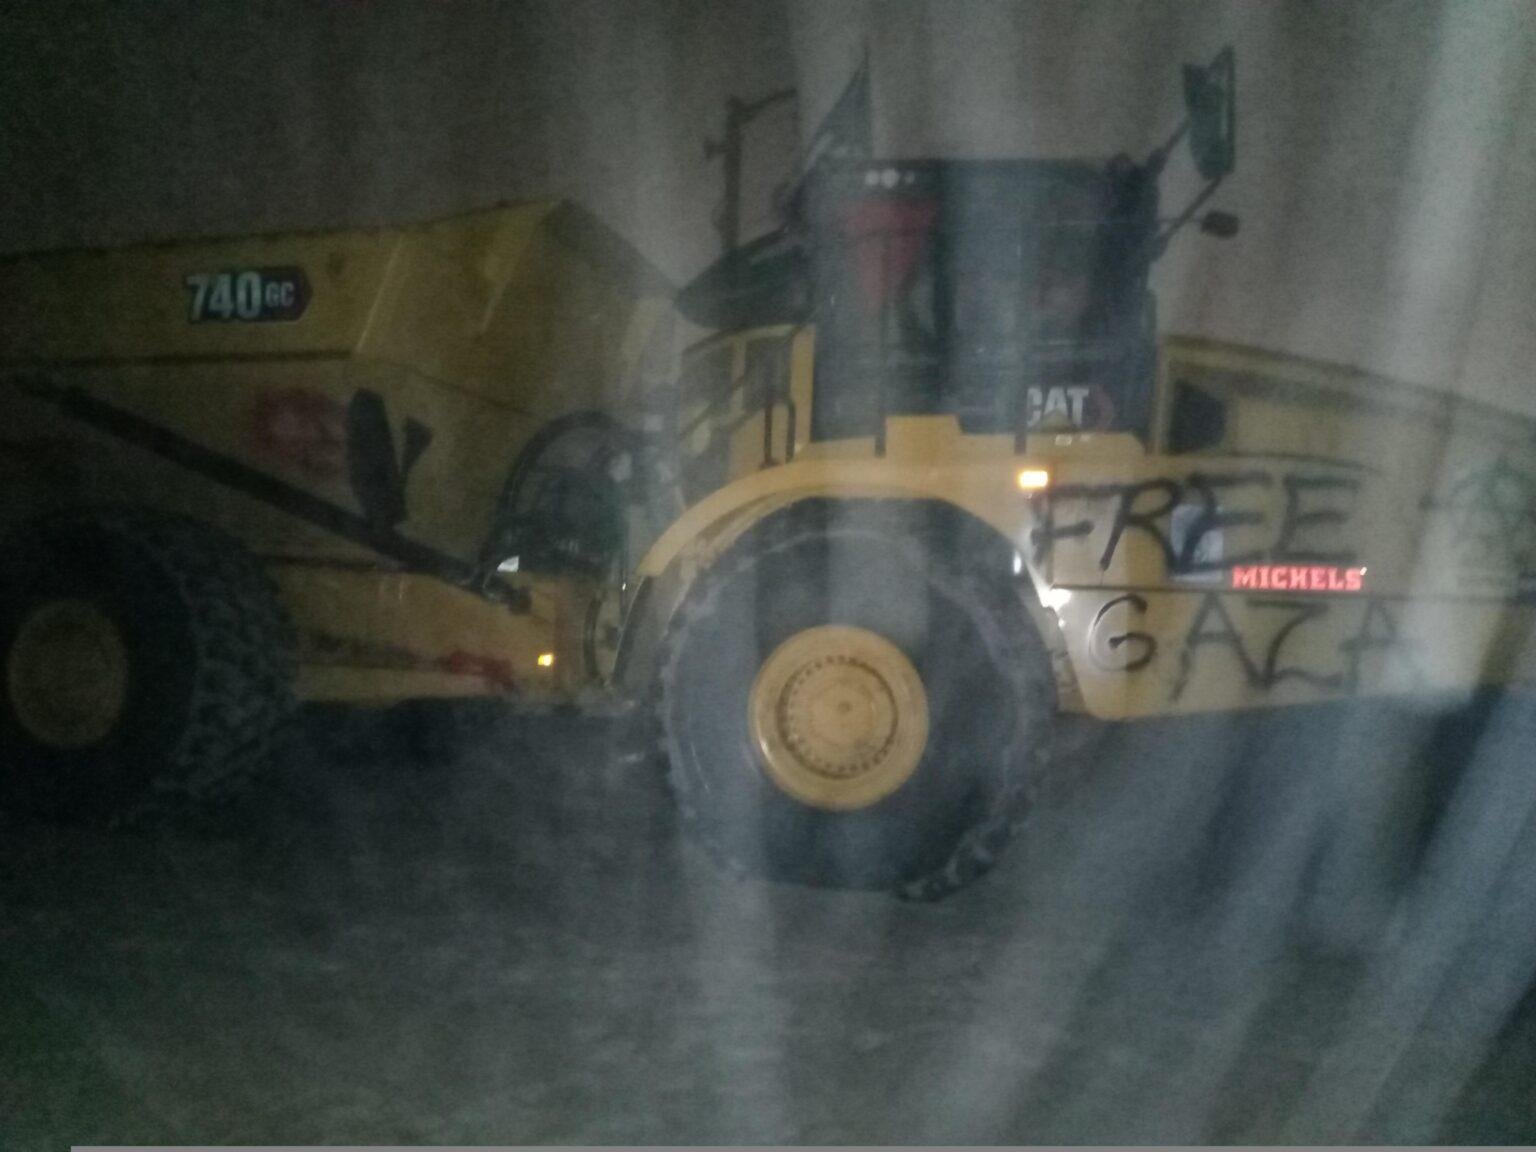 A vandalized CAT 740GC haul truck. Graffiti reads "FREE GAZA" with a circle-A and a red downward triangle.